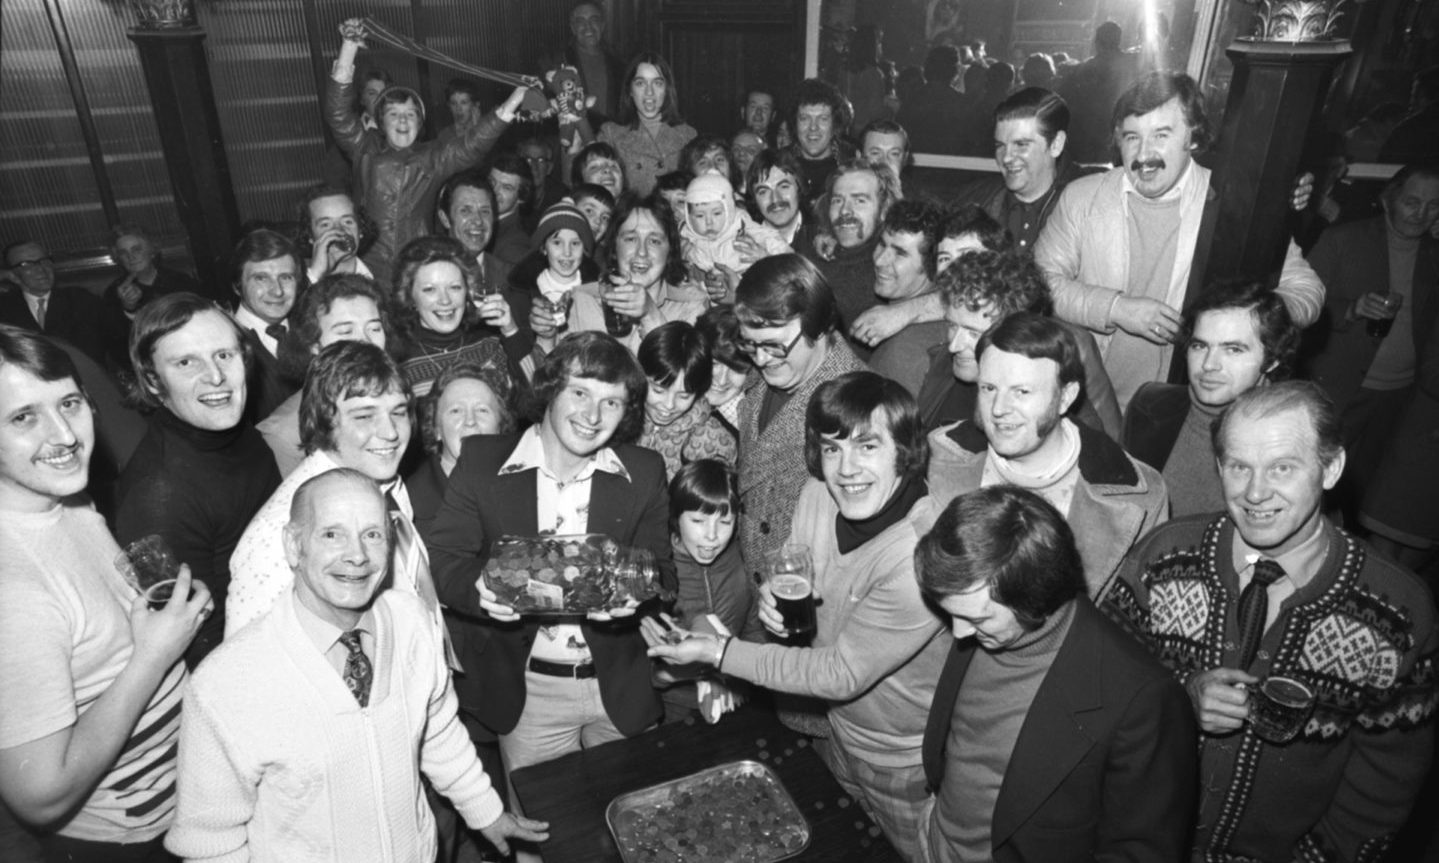 Dons idol Joe Harper was invited to the Malt Mill to empty a sweetie jar full of cash donated by the pub's customers in 1976. Joe spilled out £75.66 which went towards buying a chair for a spina bifida child at Pitfodels School, near Cults. 